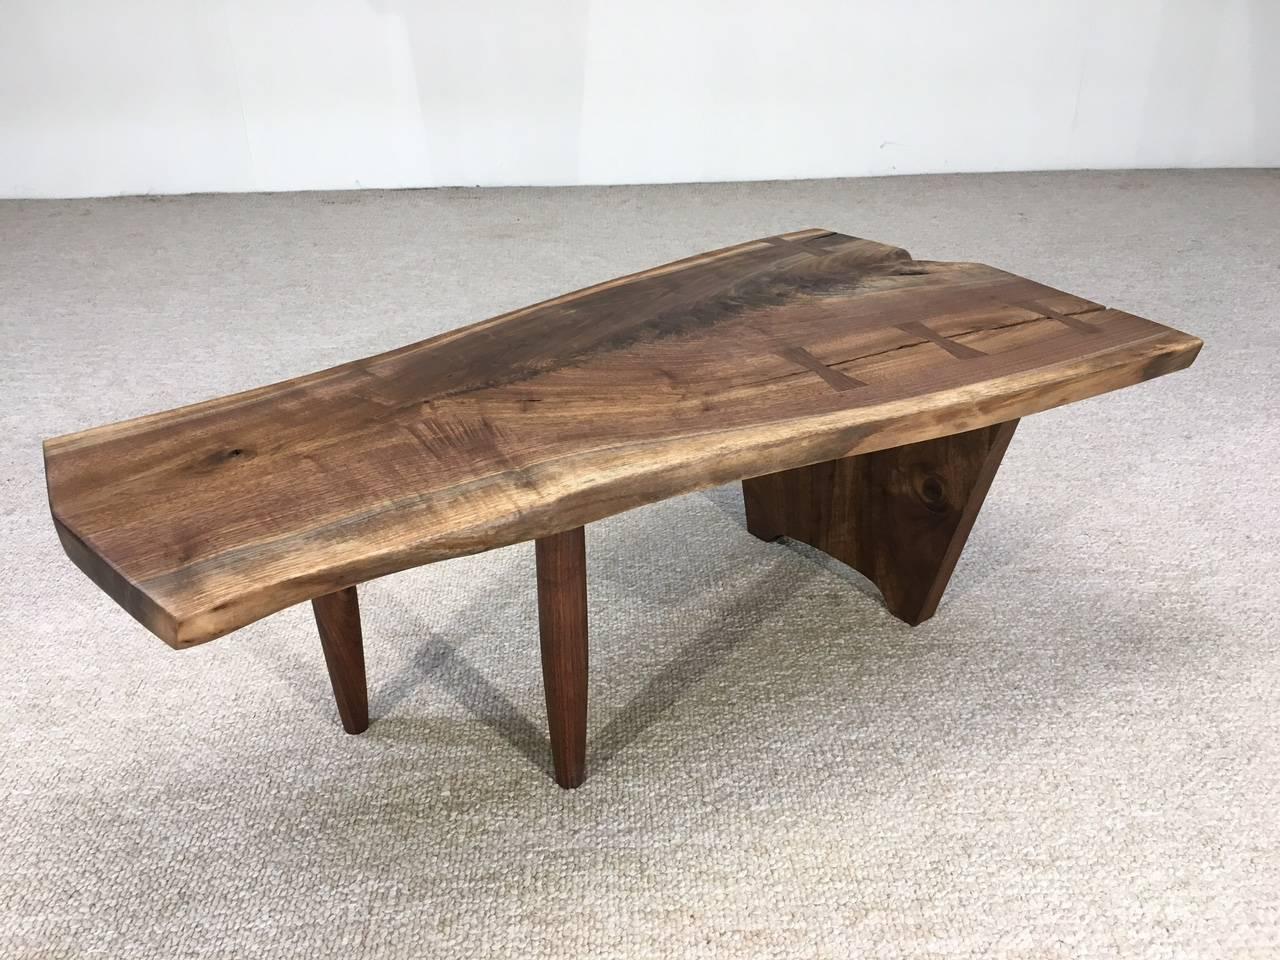 Having carefully selected stock for its grain beauty this table amazes. Designed and built in a New Hope, PA studio in the style of the great George Nakashima. A stunning table.